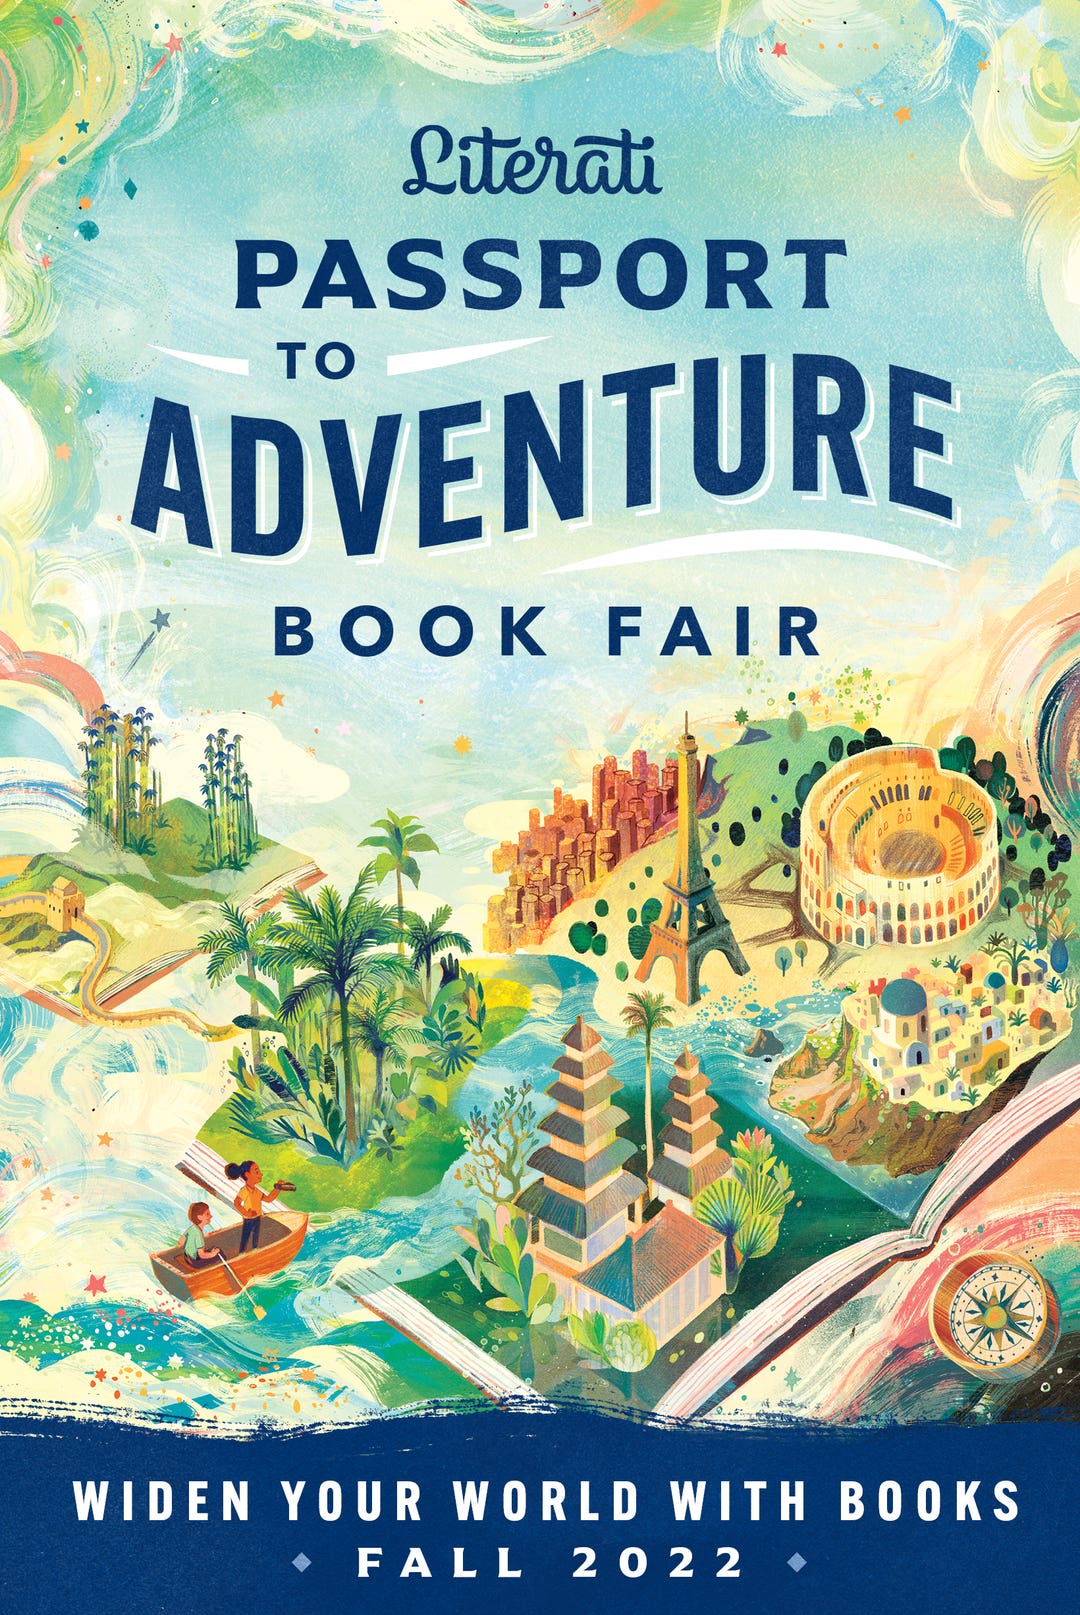 Passport to Adventure Book Fair: Widen your world with books. Fall 2022. Picture has a painting of different countries and places in the background